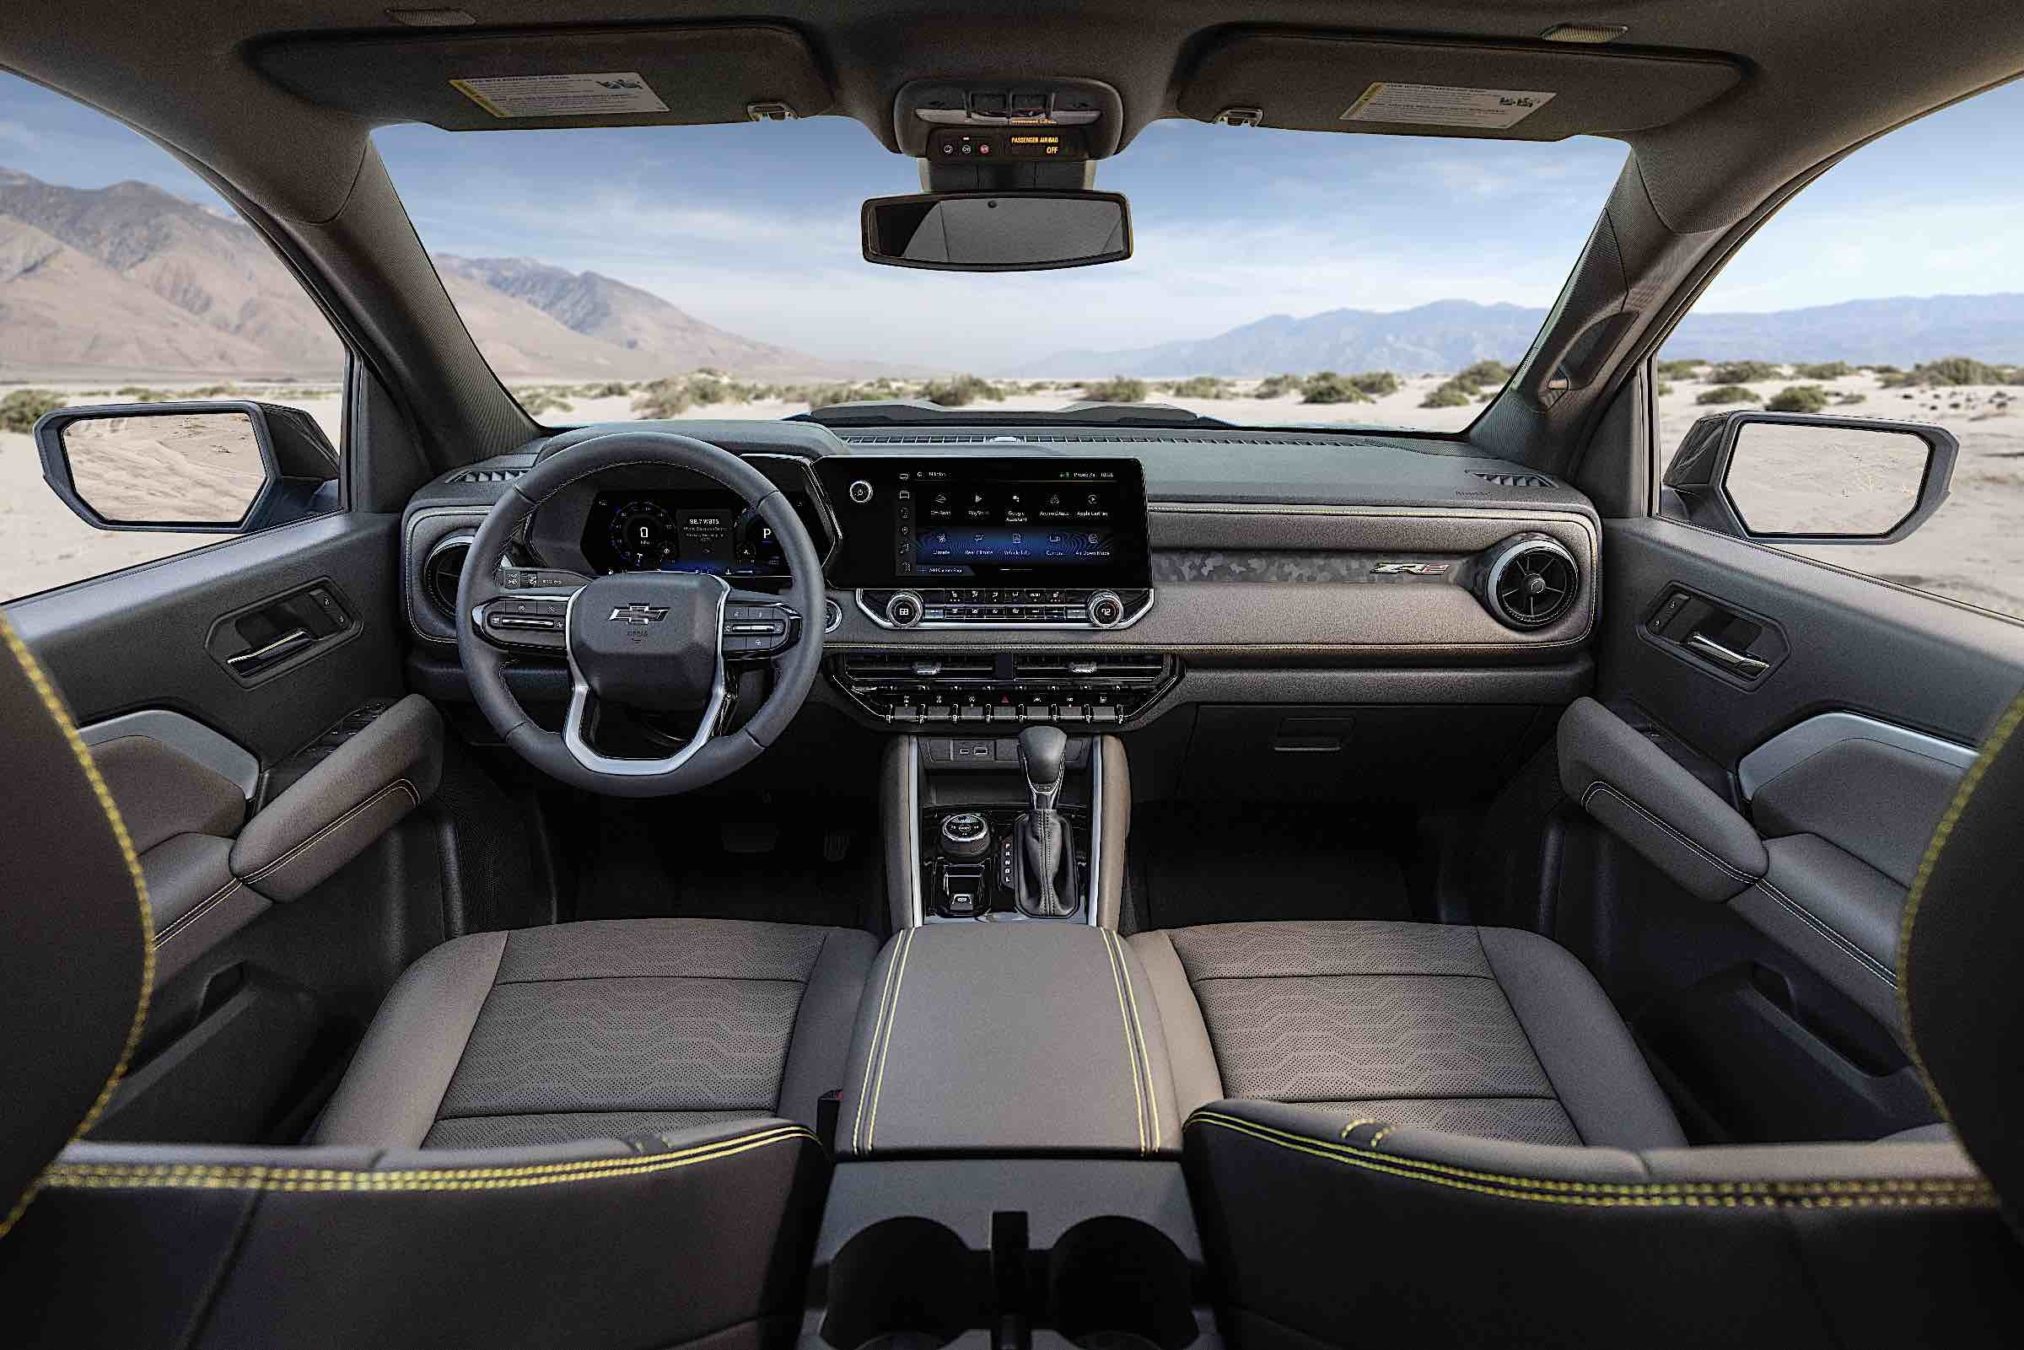 Internal dashboard and seating of the 2023 Chevrolet Colorado.